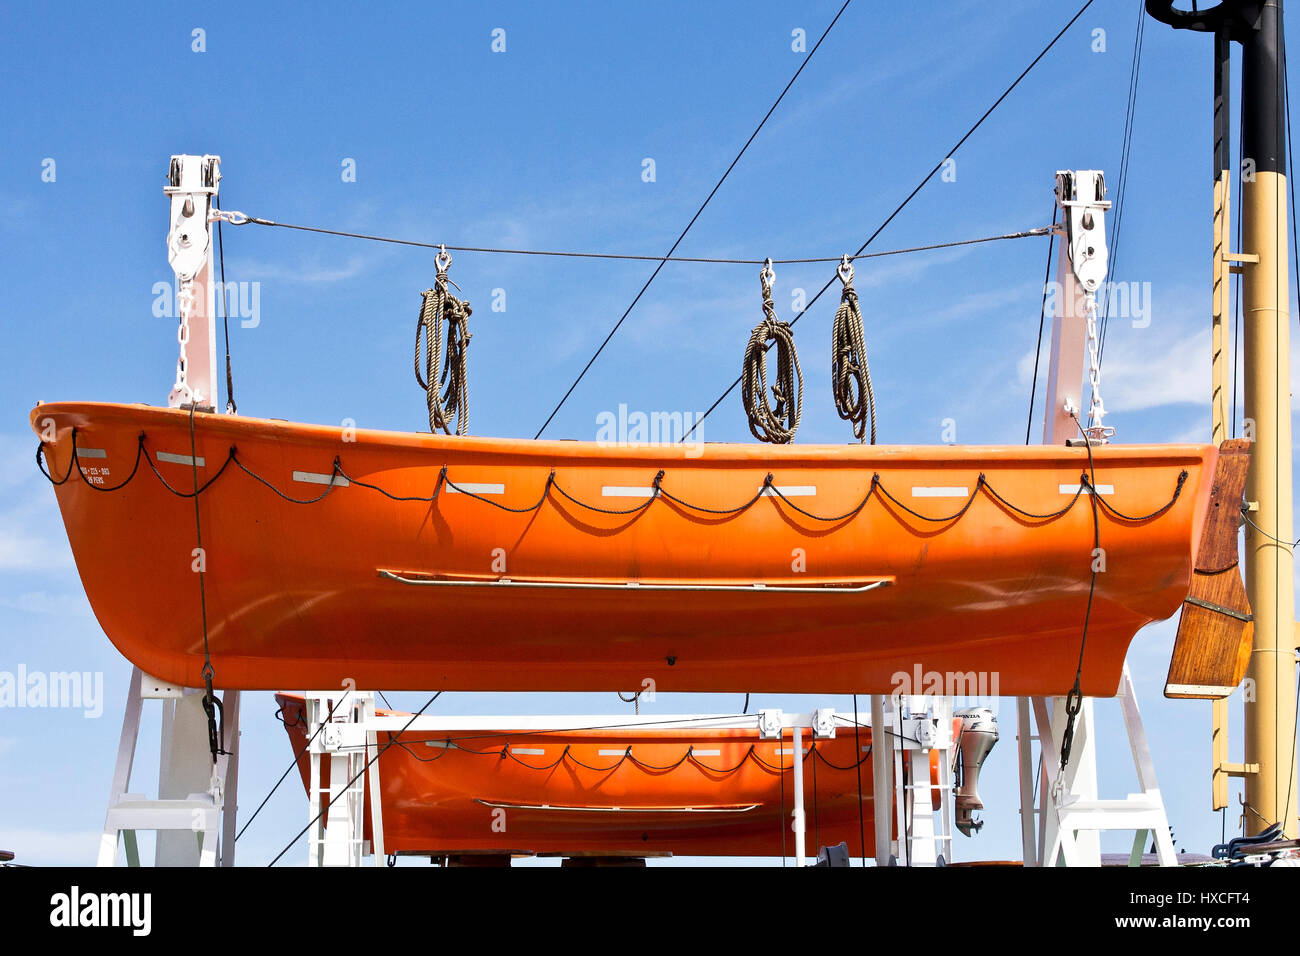 Lifeboats on a ship in the harbour, Lifeboats on a ship in the harbour |, Rettungsboote auf einem Schiff im Hafen |Lifeboats on a ship in the harbor| Stock Photo